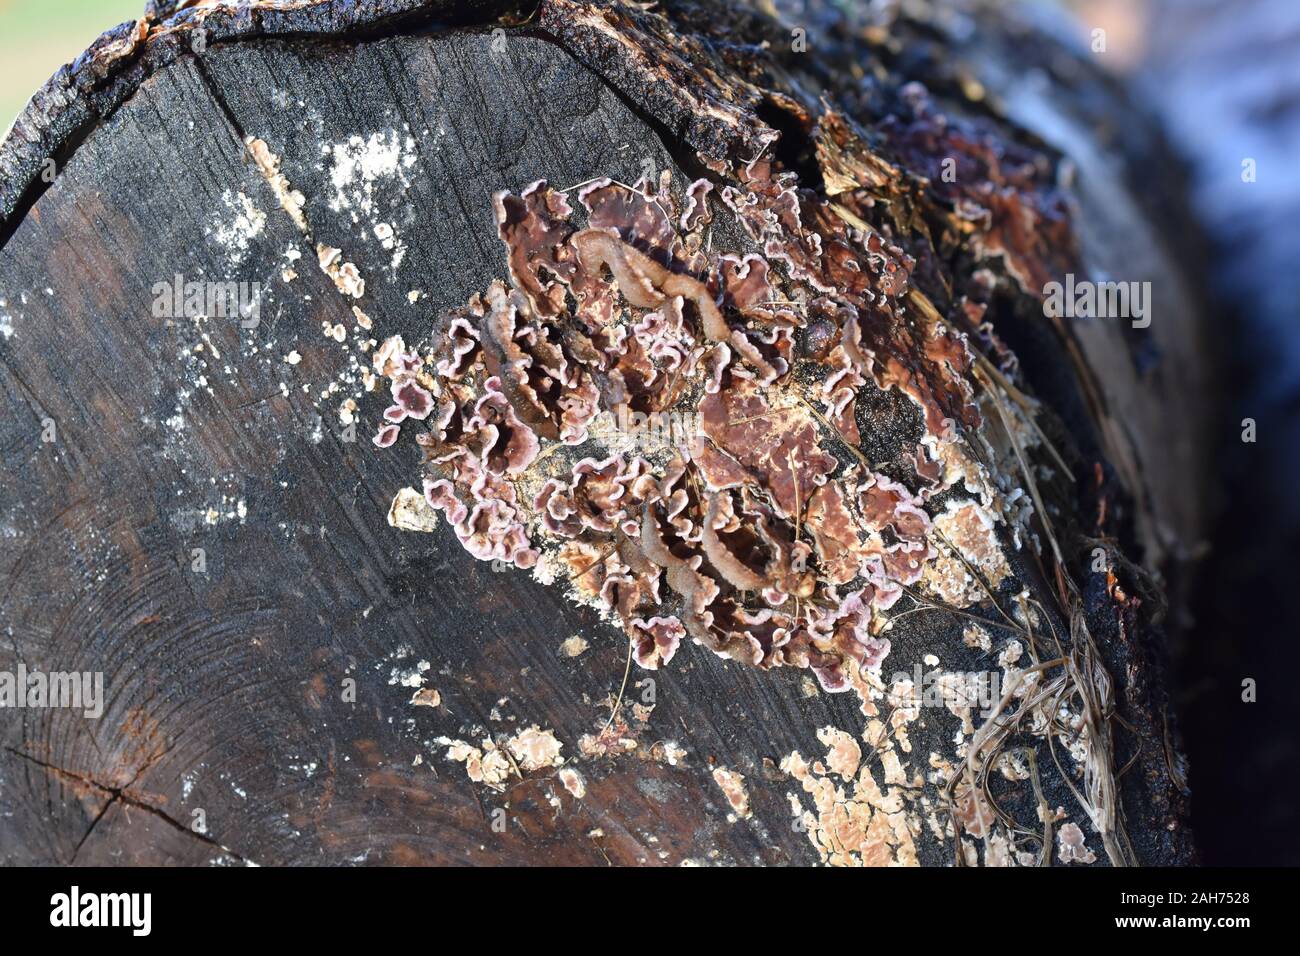 Silver leaf fungus Chondrostereum purpureum growing on a log Stock Photo